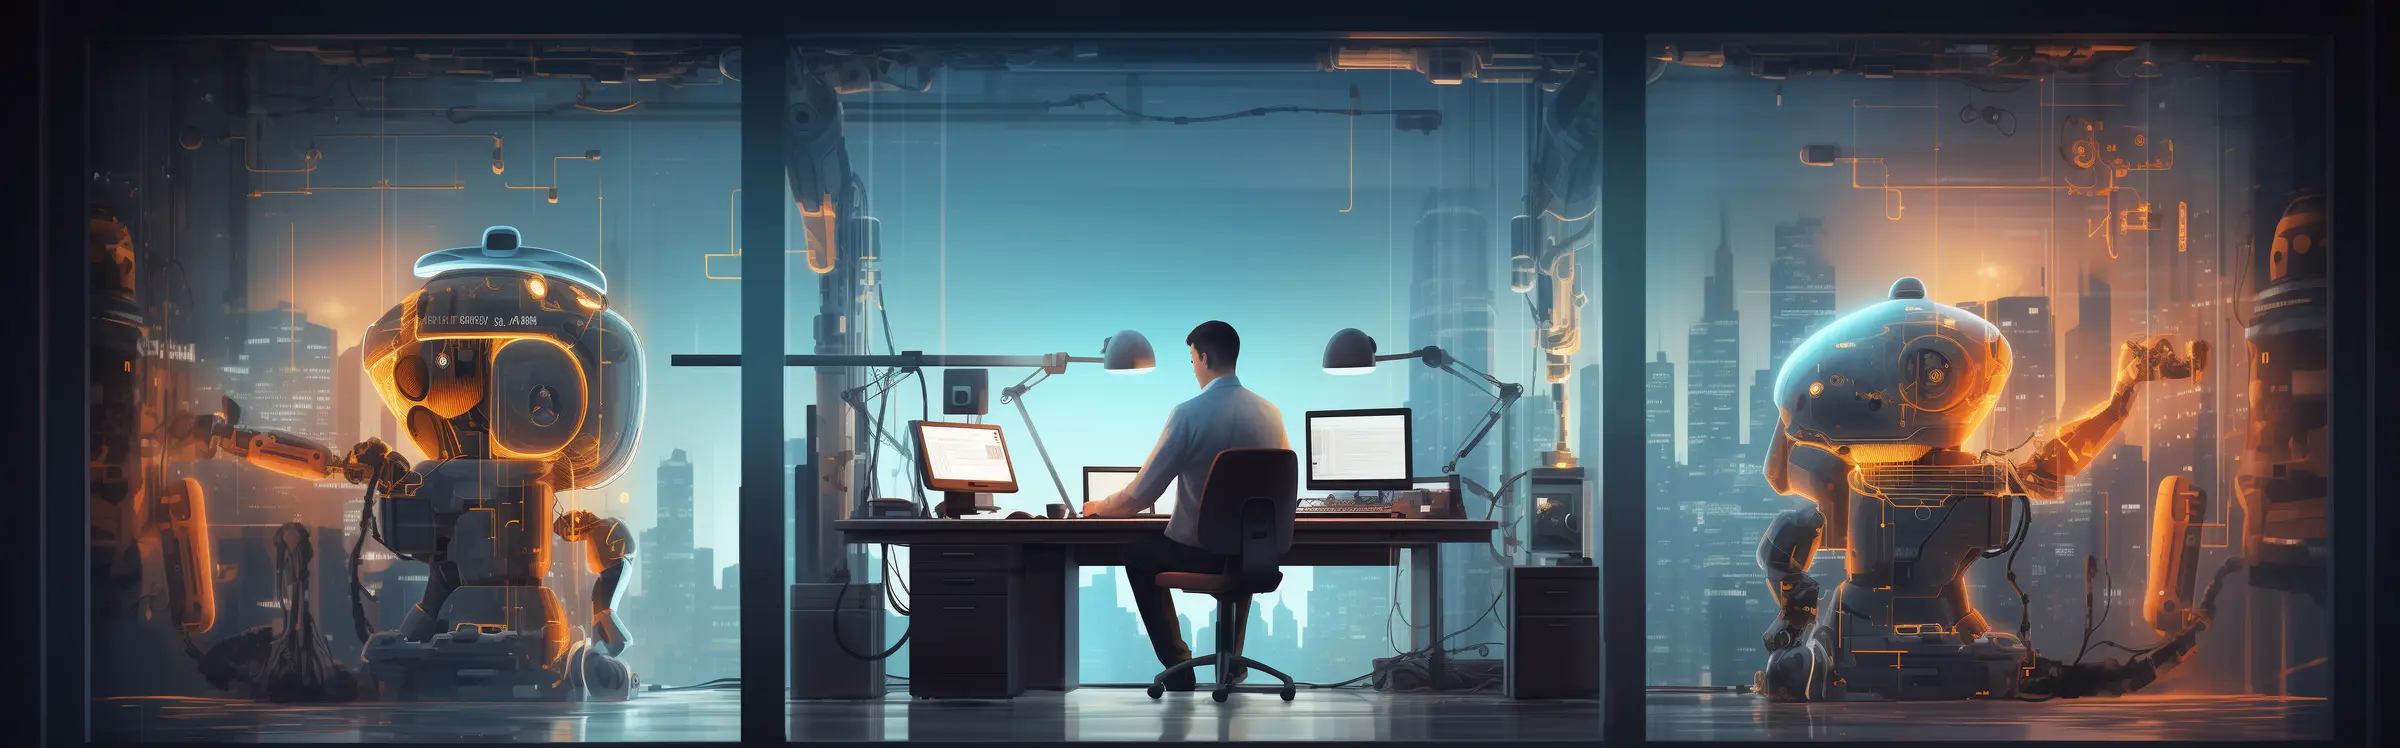 Futuristic office with a person at a computer flanked by two large robots, symbolizing advanced business automation against a city backdrop at dusk.